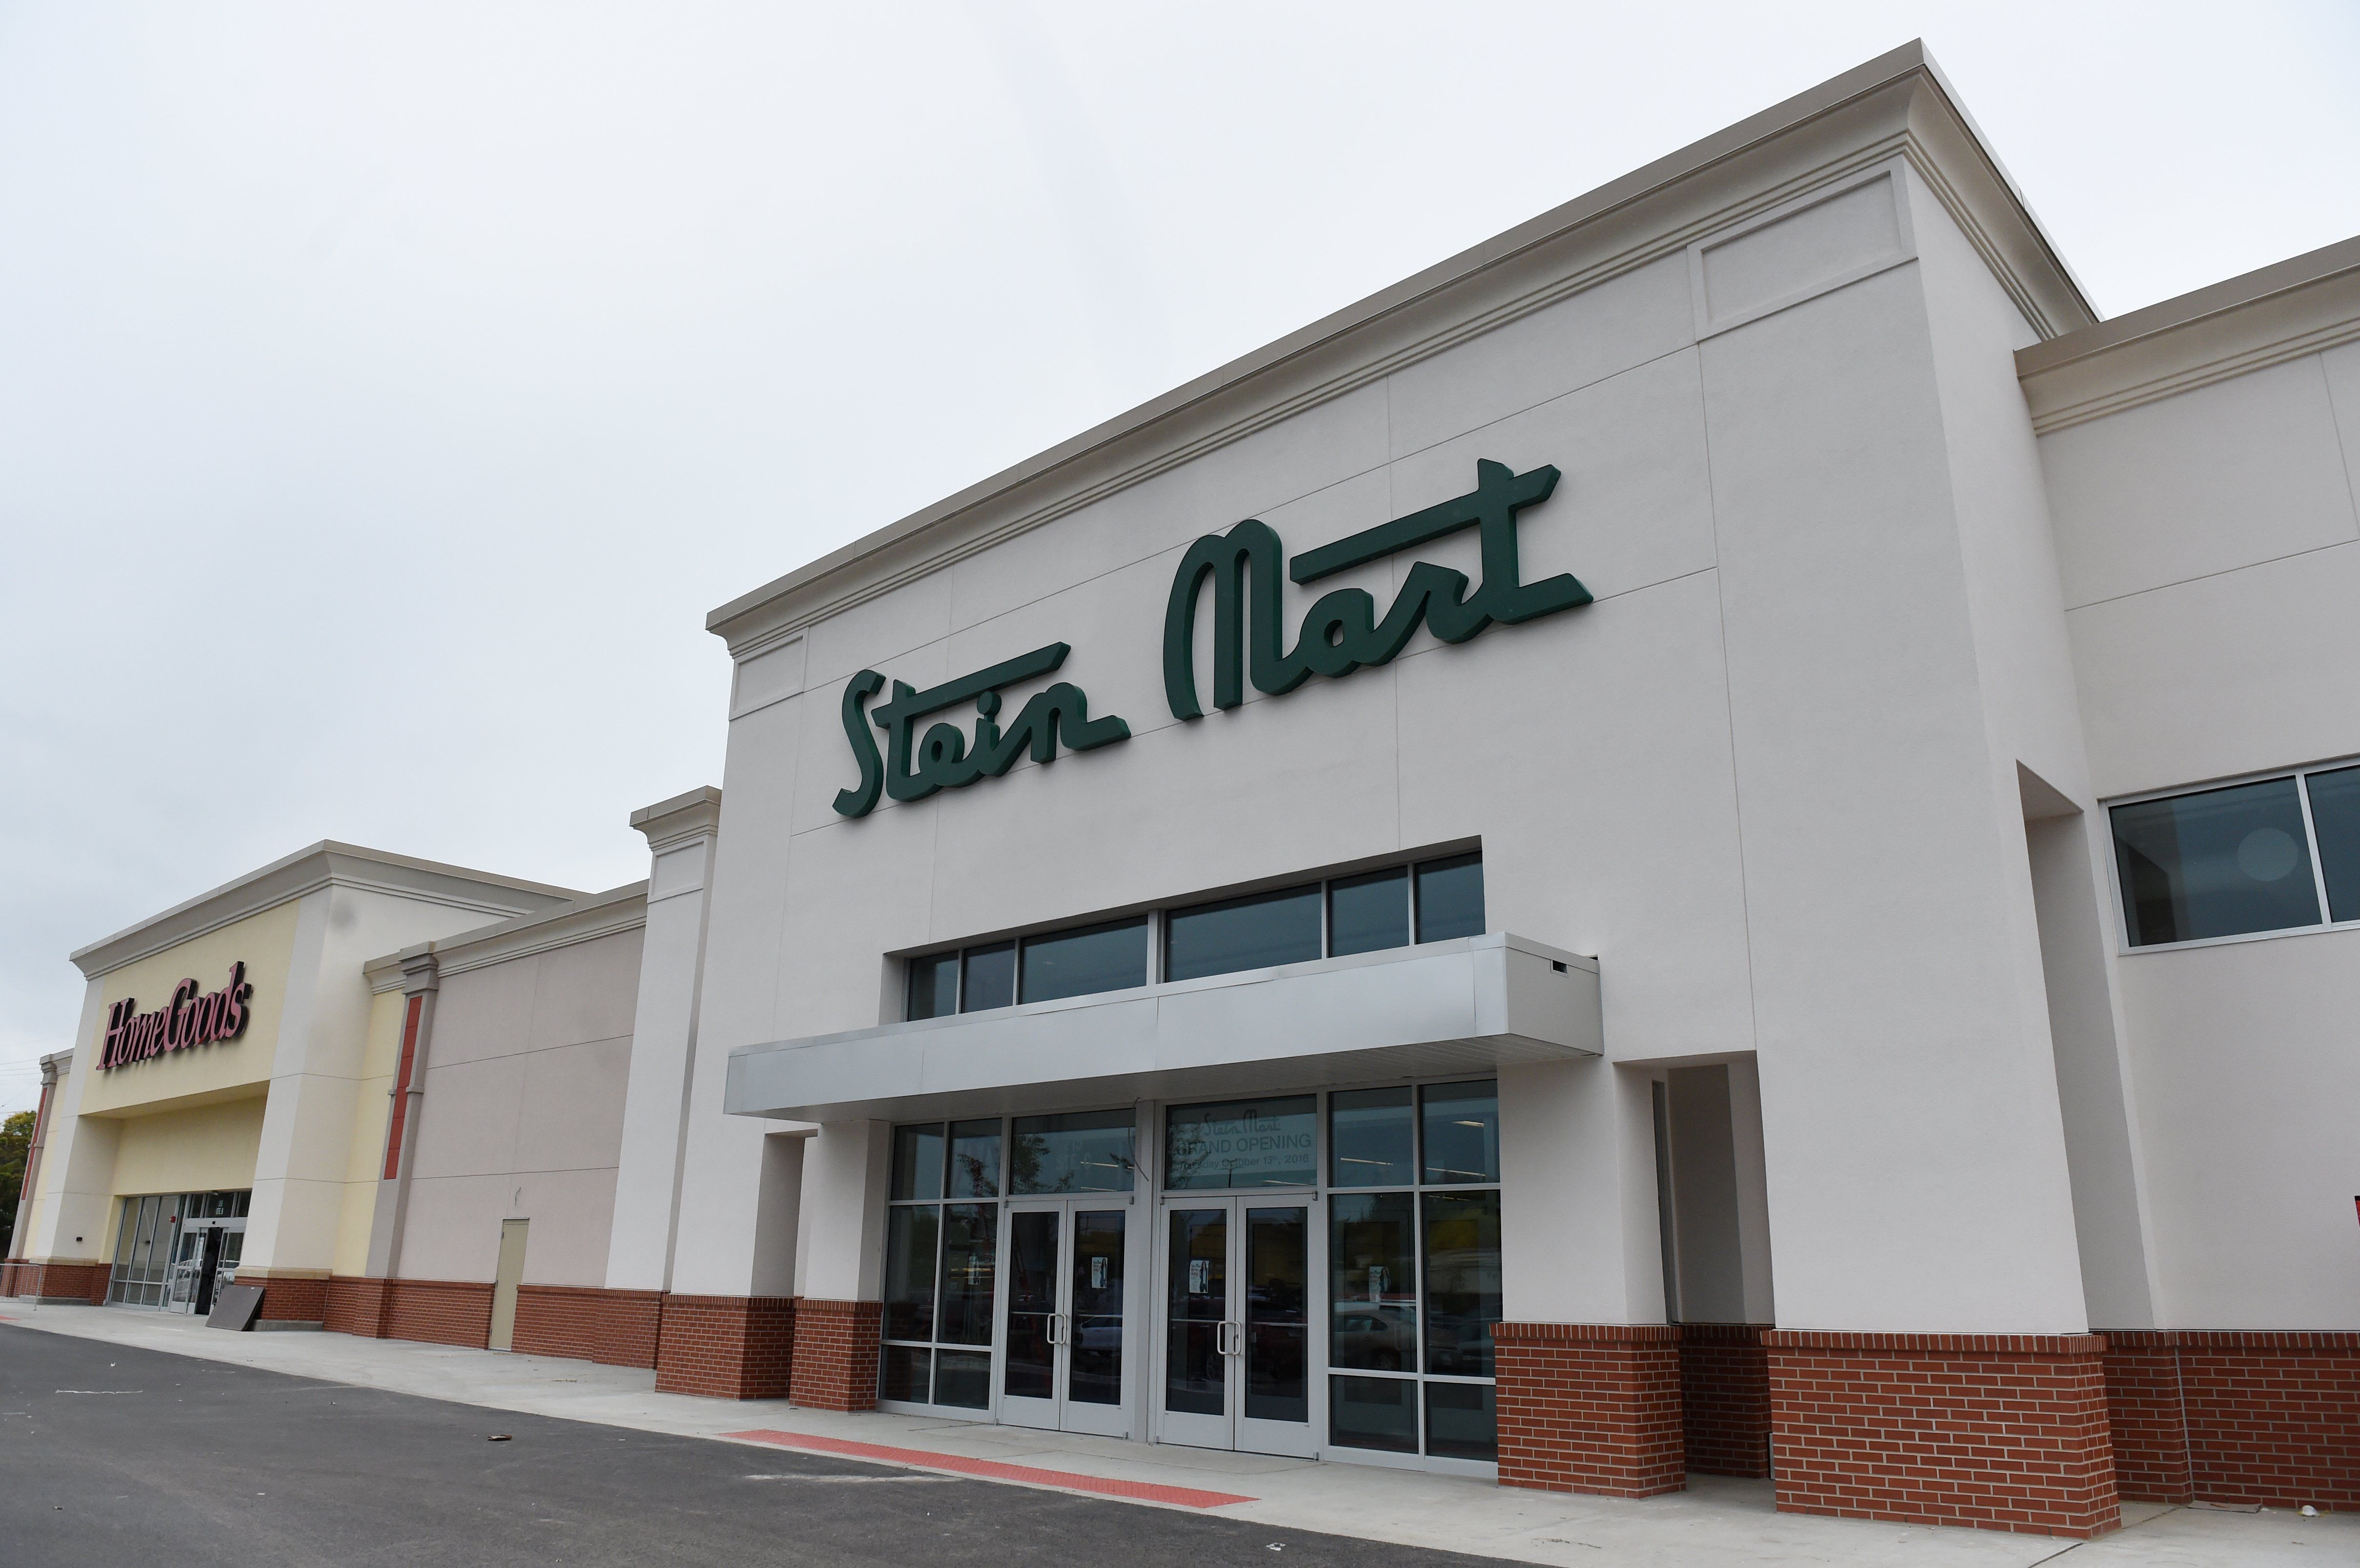 STEIN MART - CLOSED - 94 Photos & 12 Reviews - 1400 Foothill Dr, Salt Lake  City, Utah - Department Stores - Phone Number - Yelp